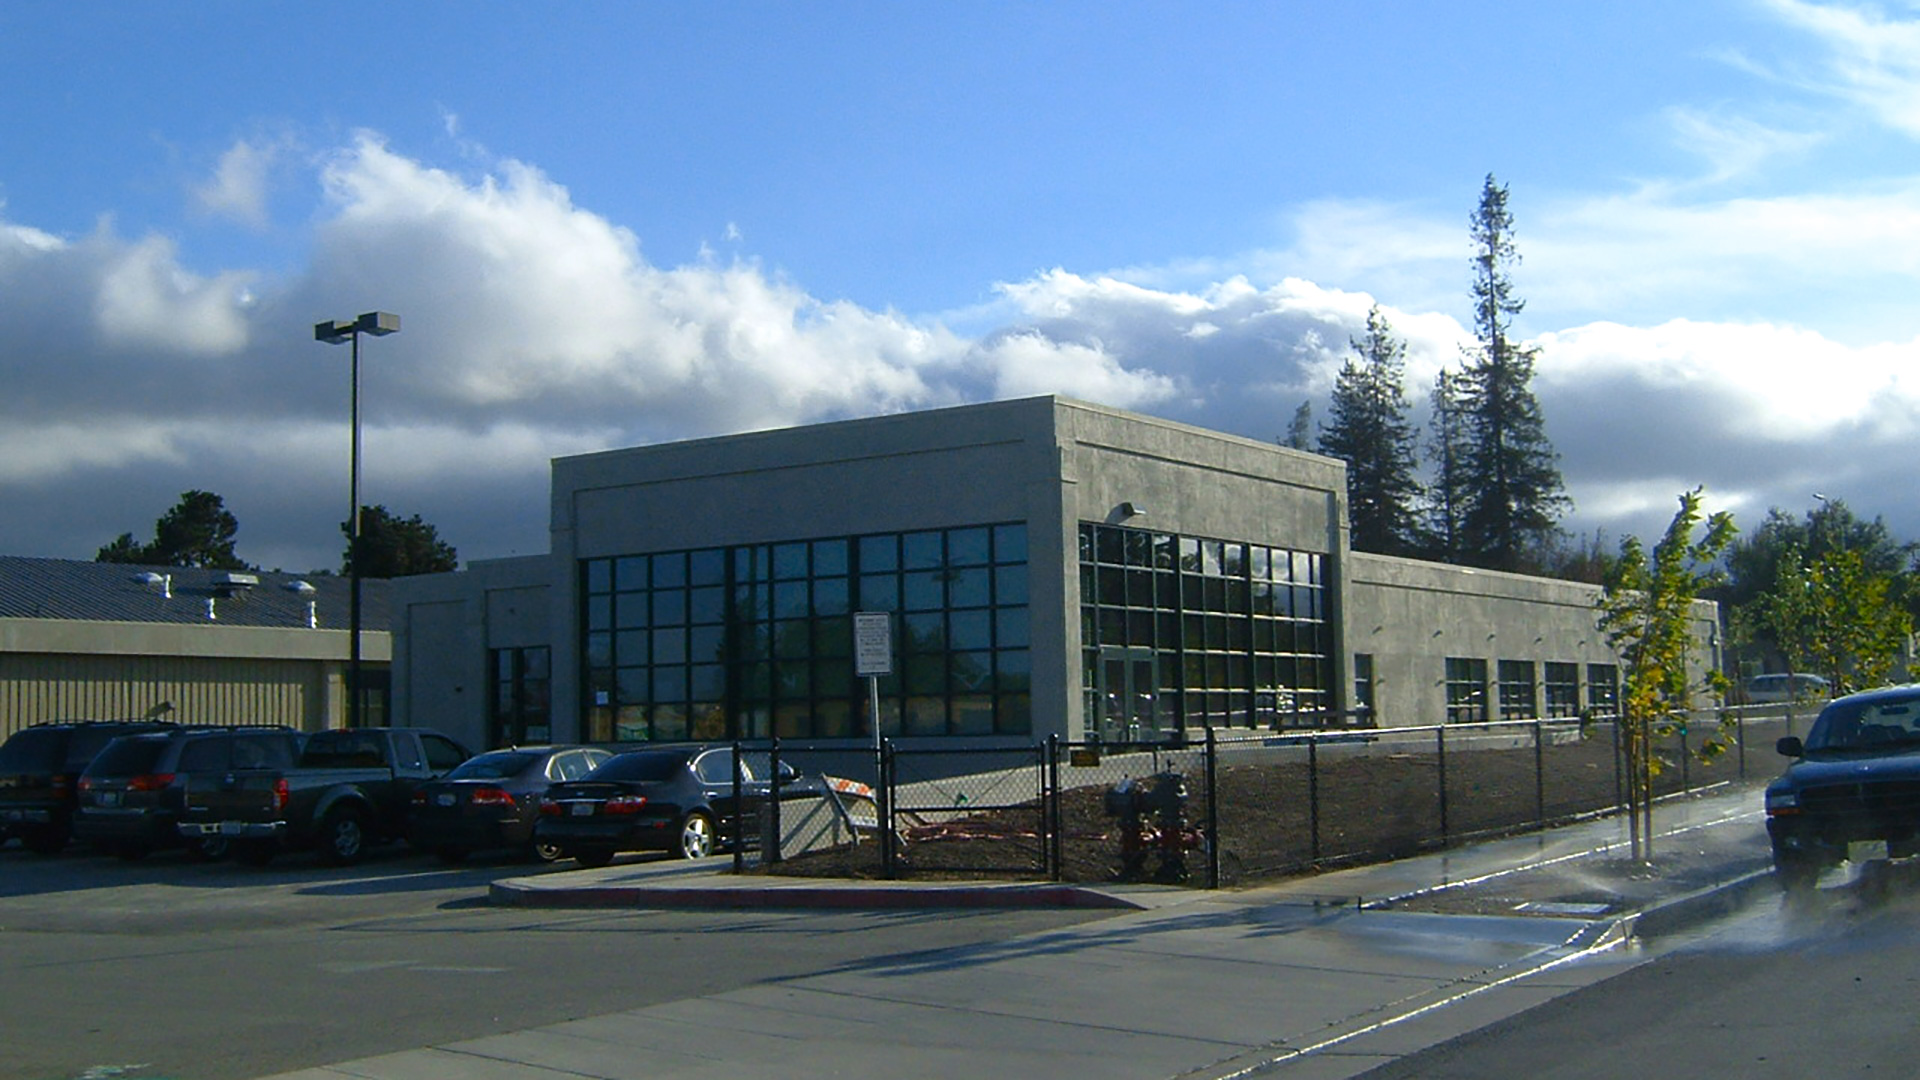 Exterior of district office before landscaping, showing extend of large glass windows around front and side of building.